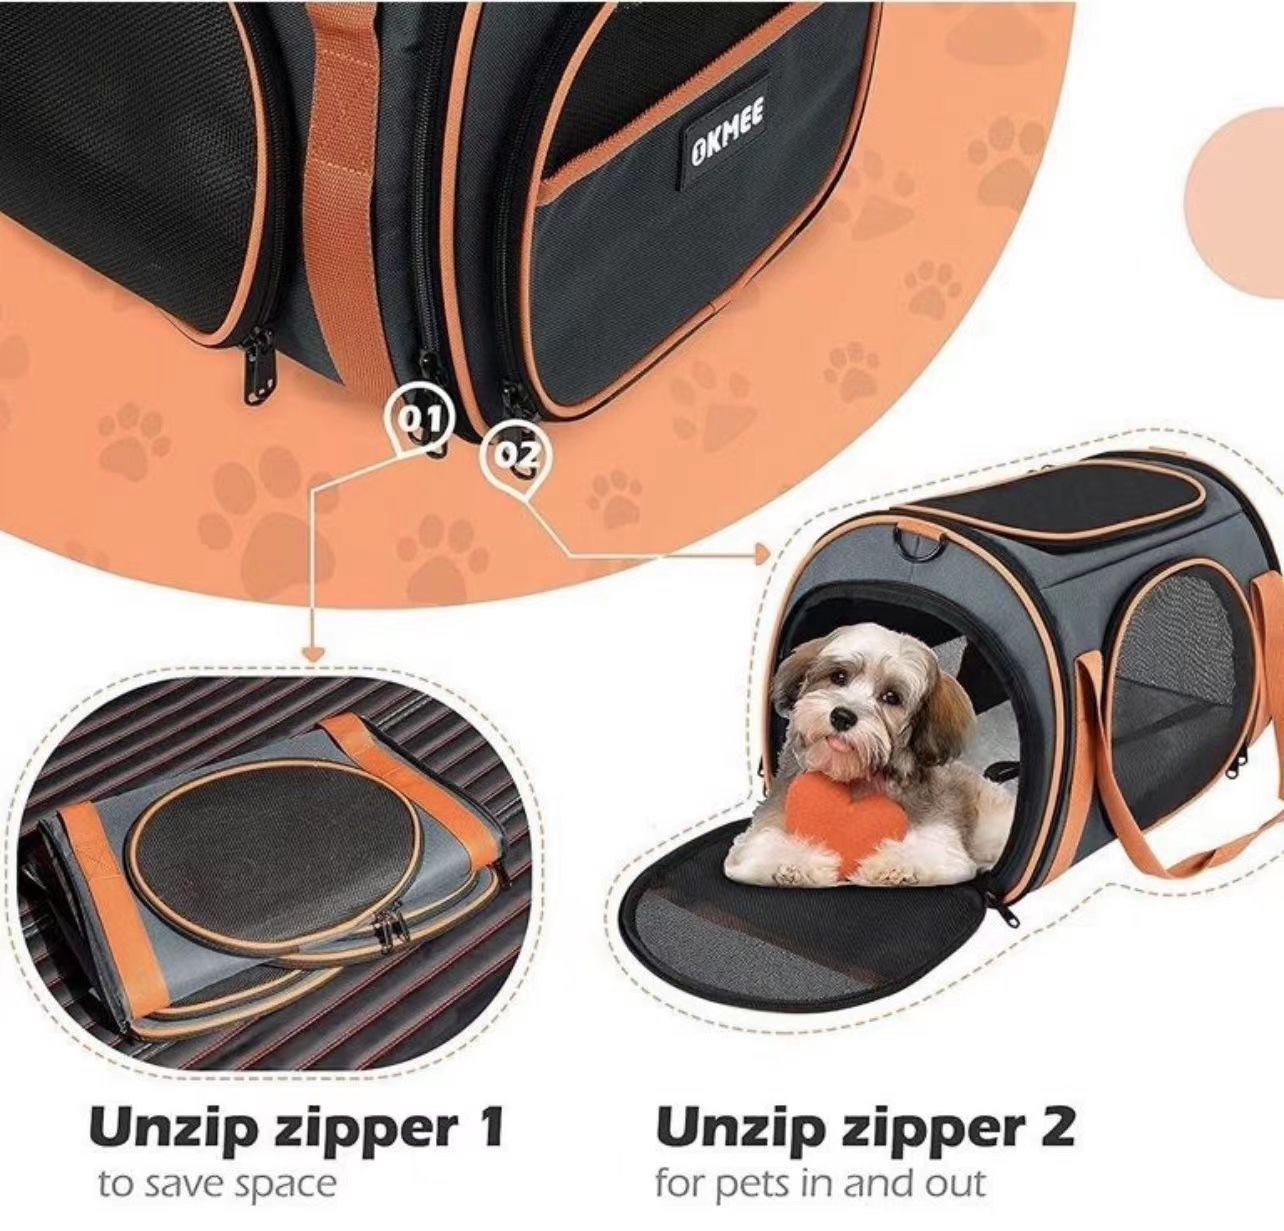 OKMEE Portable Pet Carrier Bag, with Ventilation for Small Medium Cats Dogs Puppies with 5 Mesh Windows 4 Open Doors